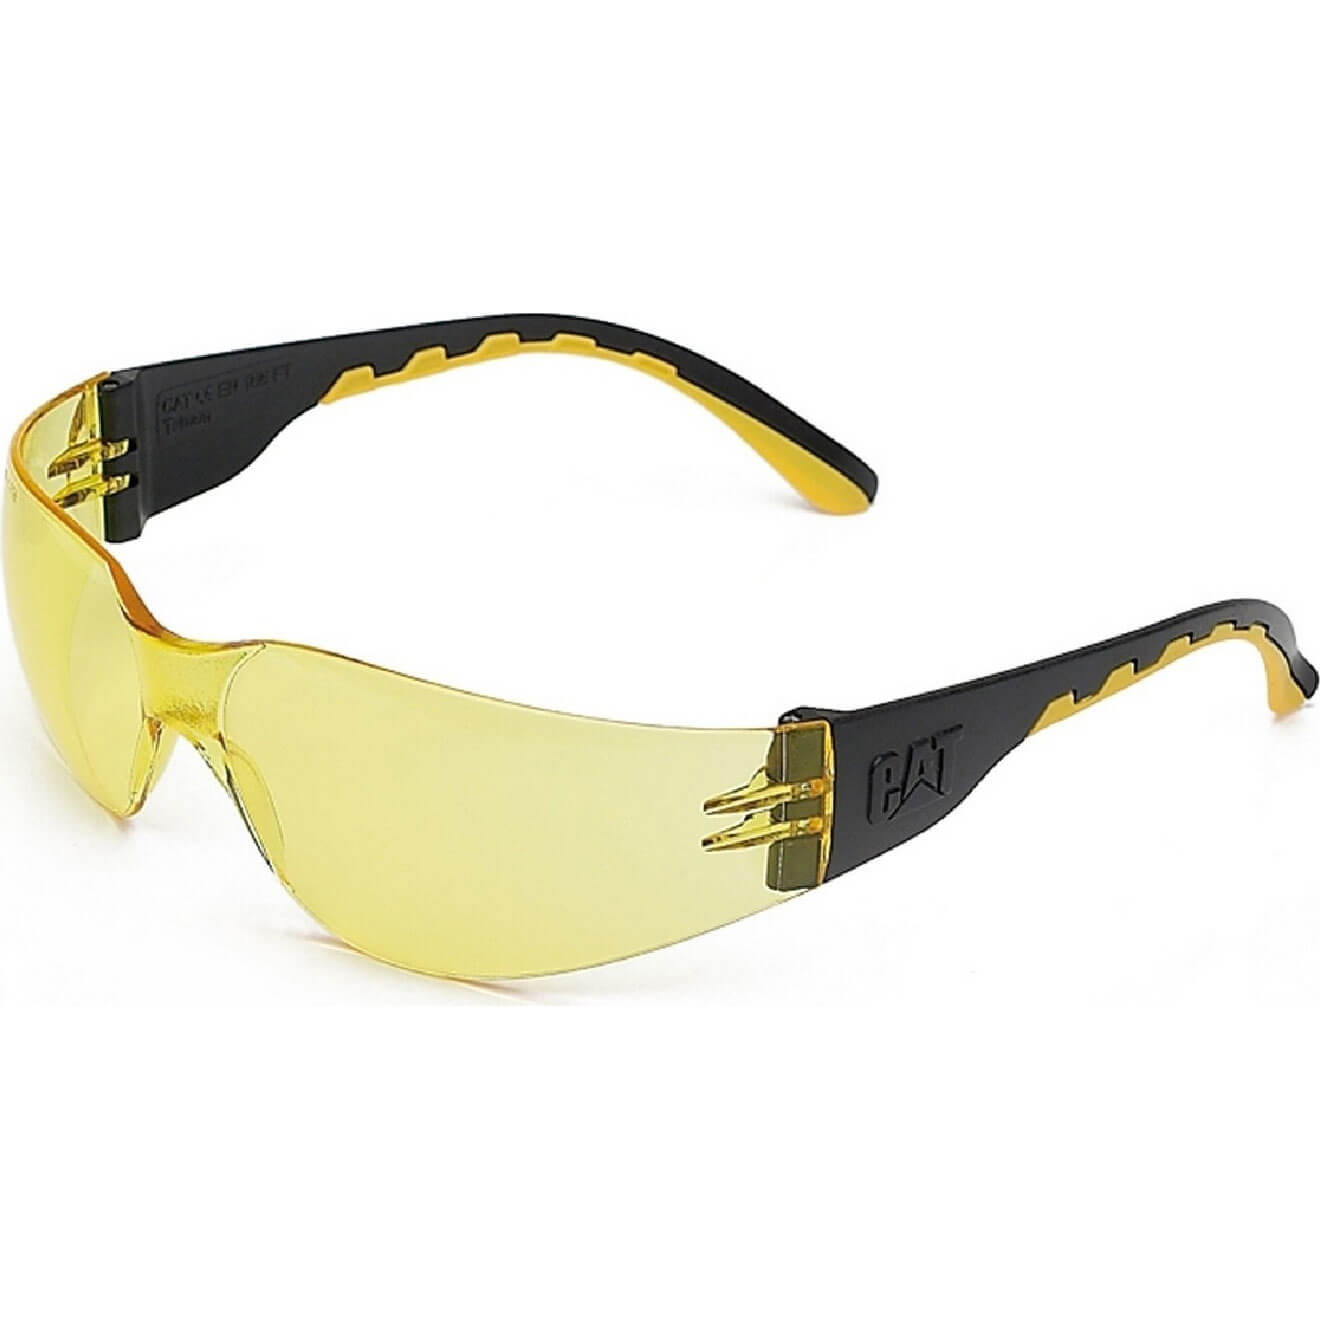 Image of Caterpillar Track Protective Safety Glasses Yellow